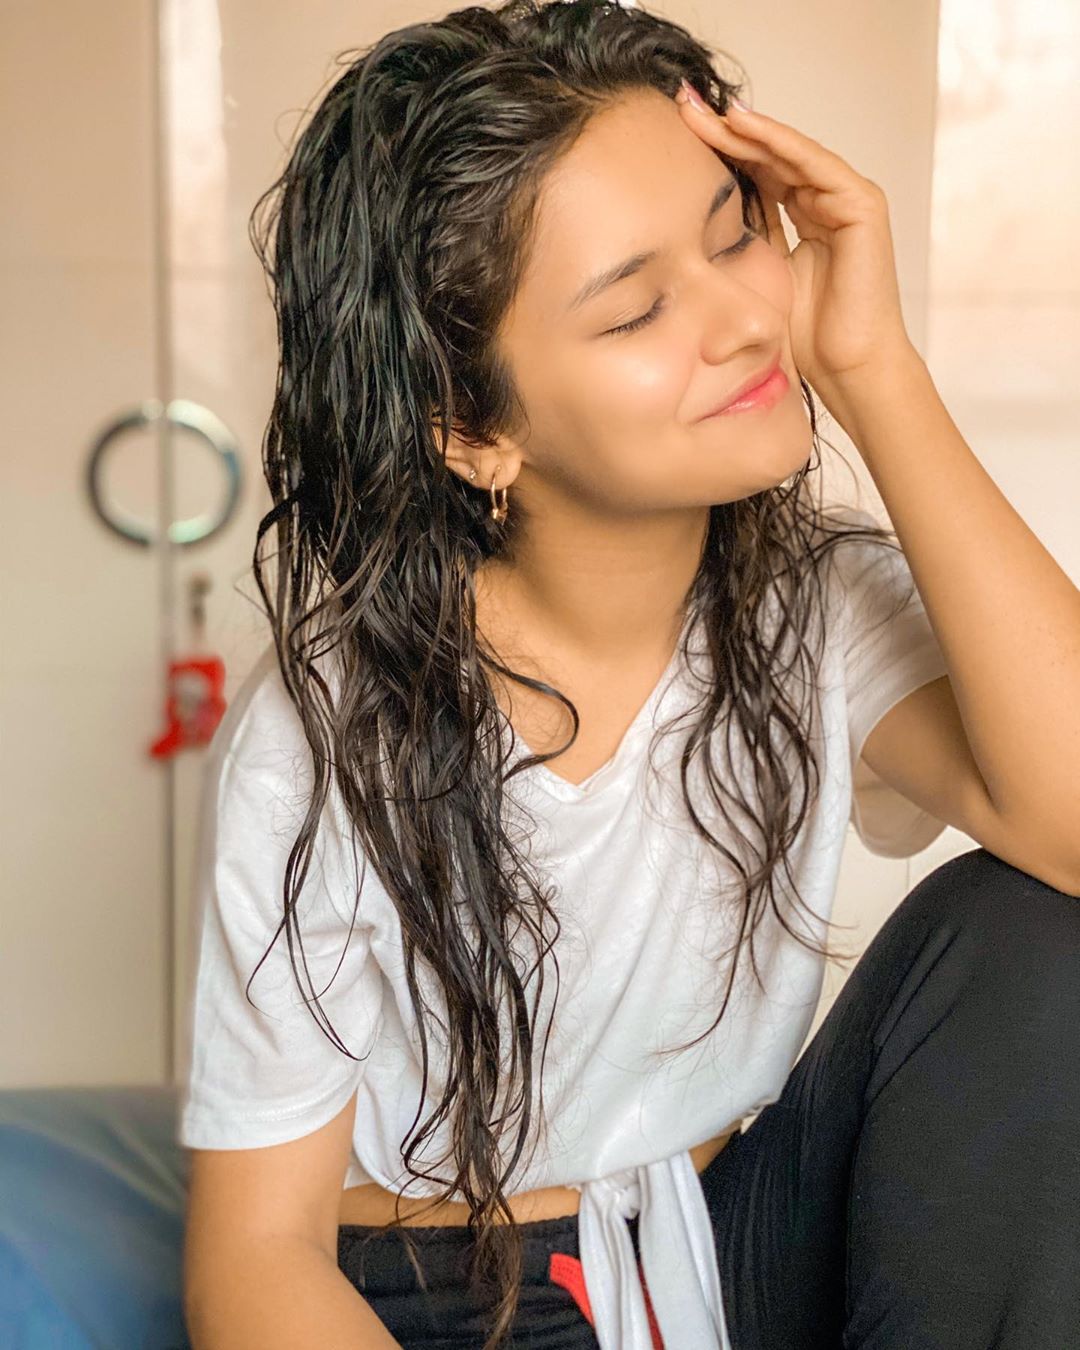 Avneet Kaur Fresh out of the shower 
How’s everyone?? Wallpaper, Photo, Image & Picture